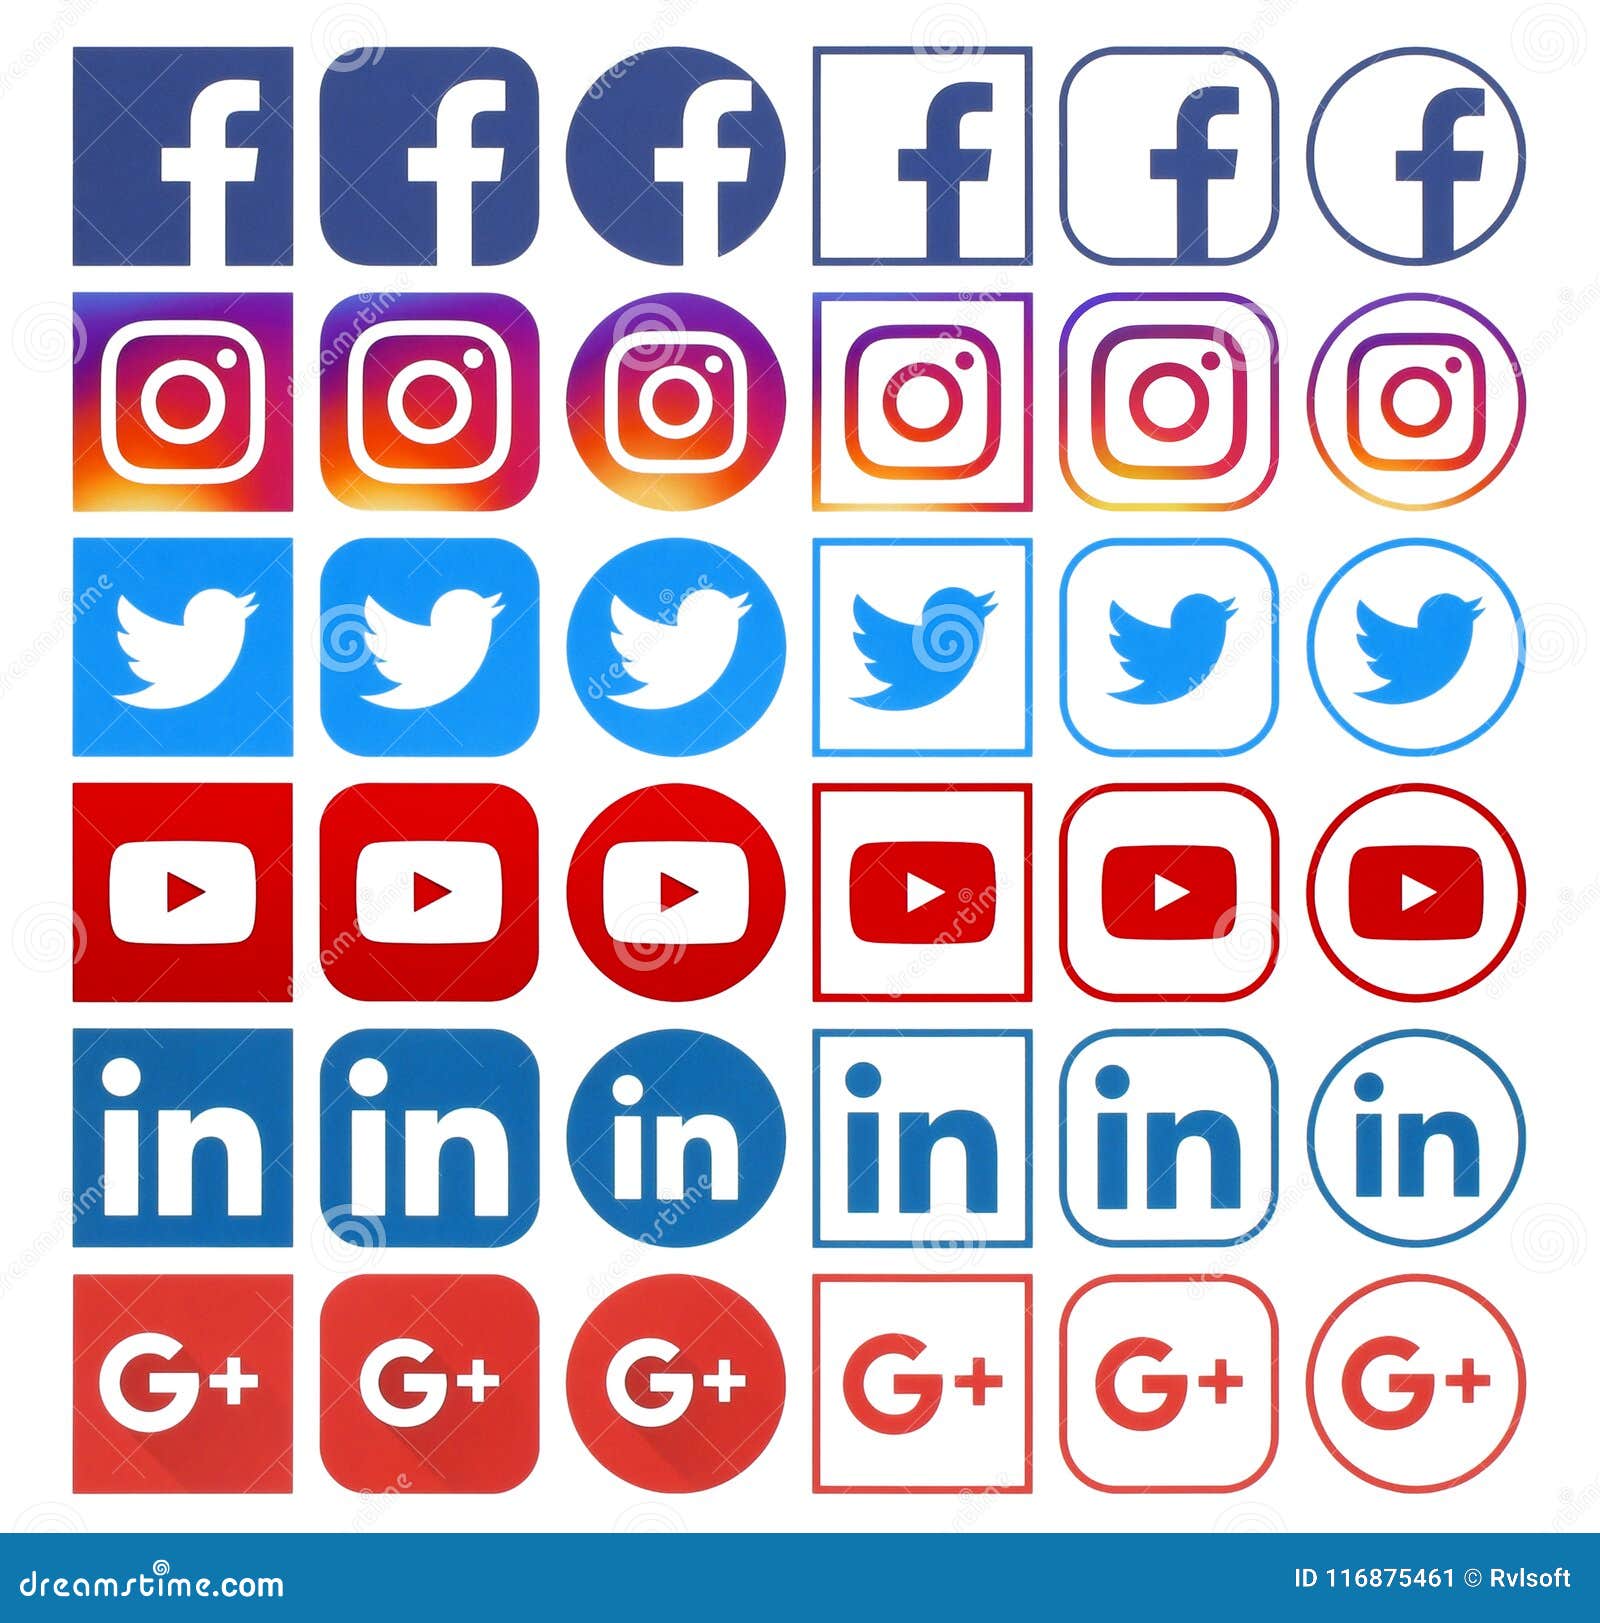 Square Social Media Icons Stock Images Download 1097 Royalty Free Photos